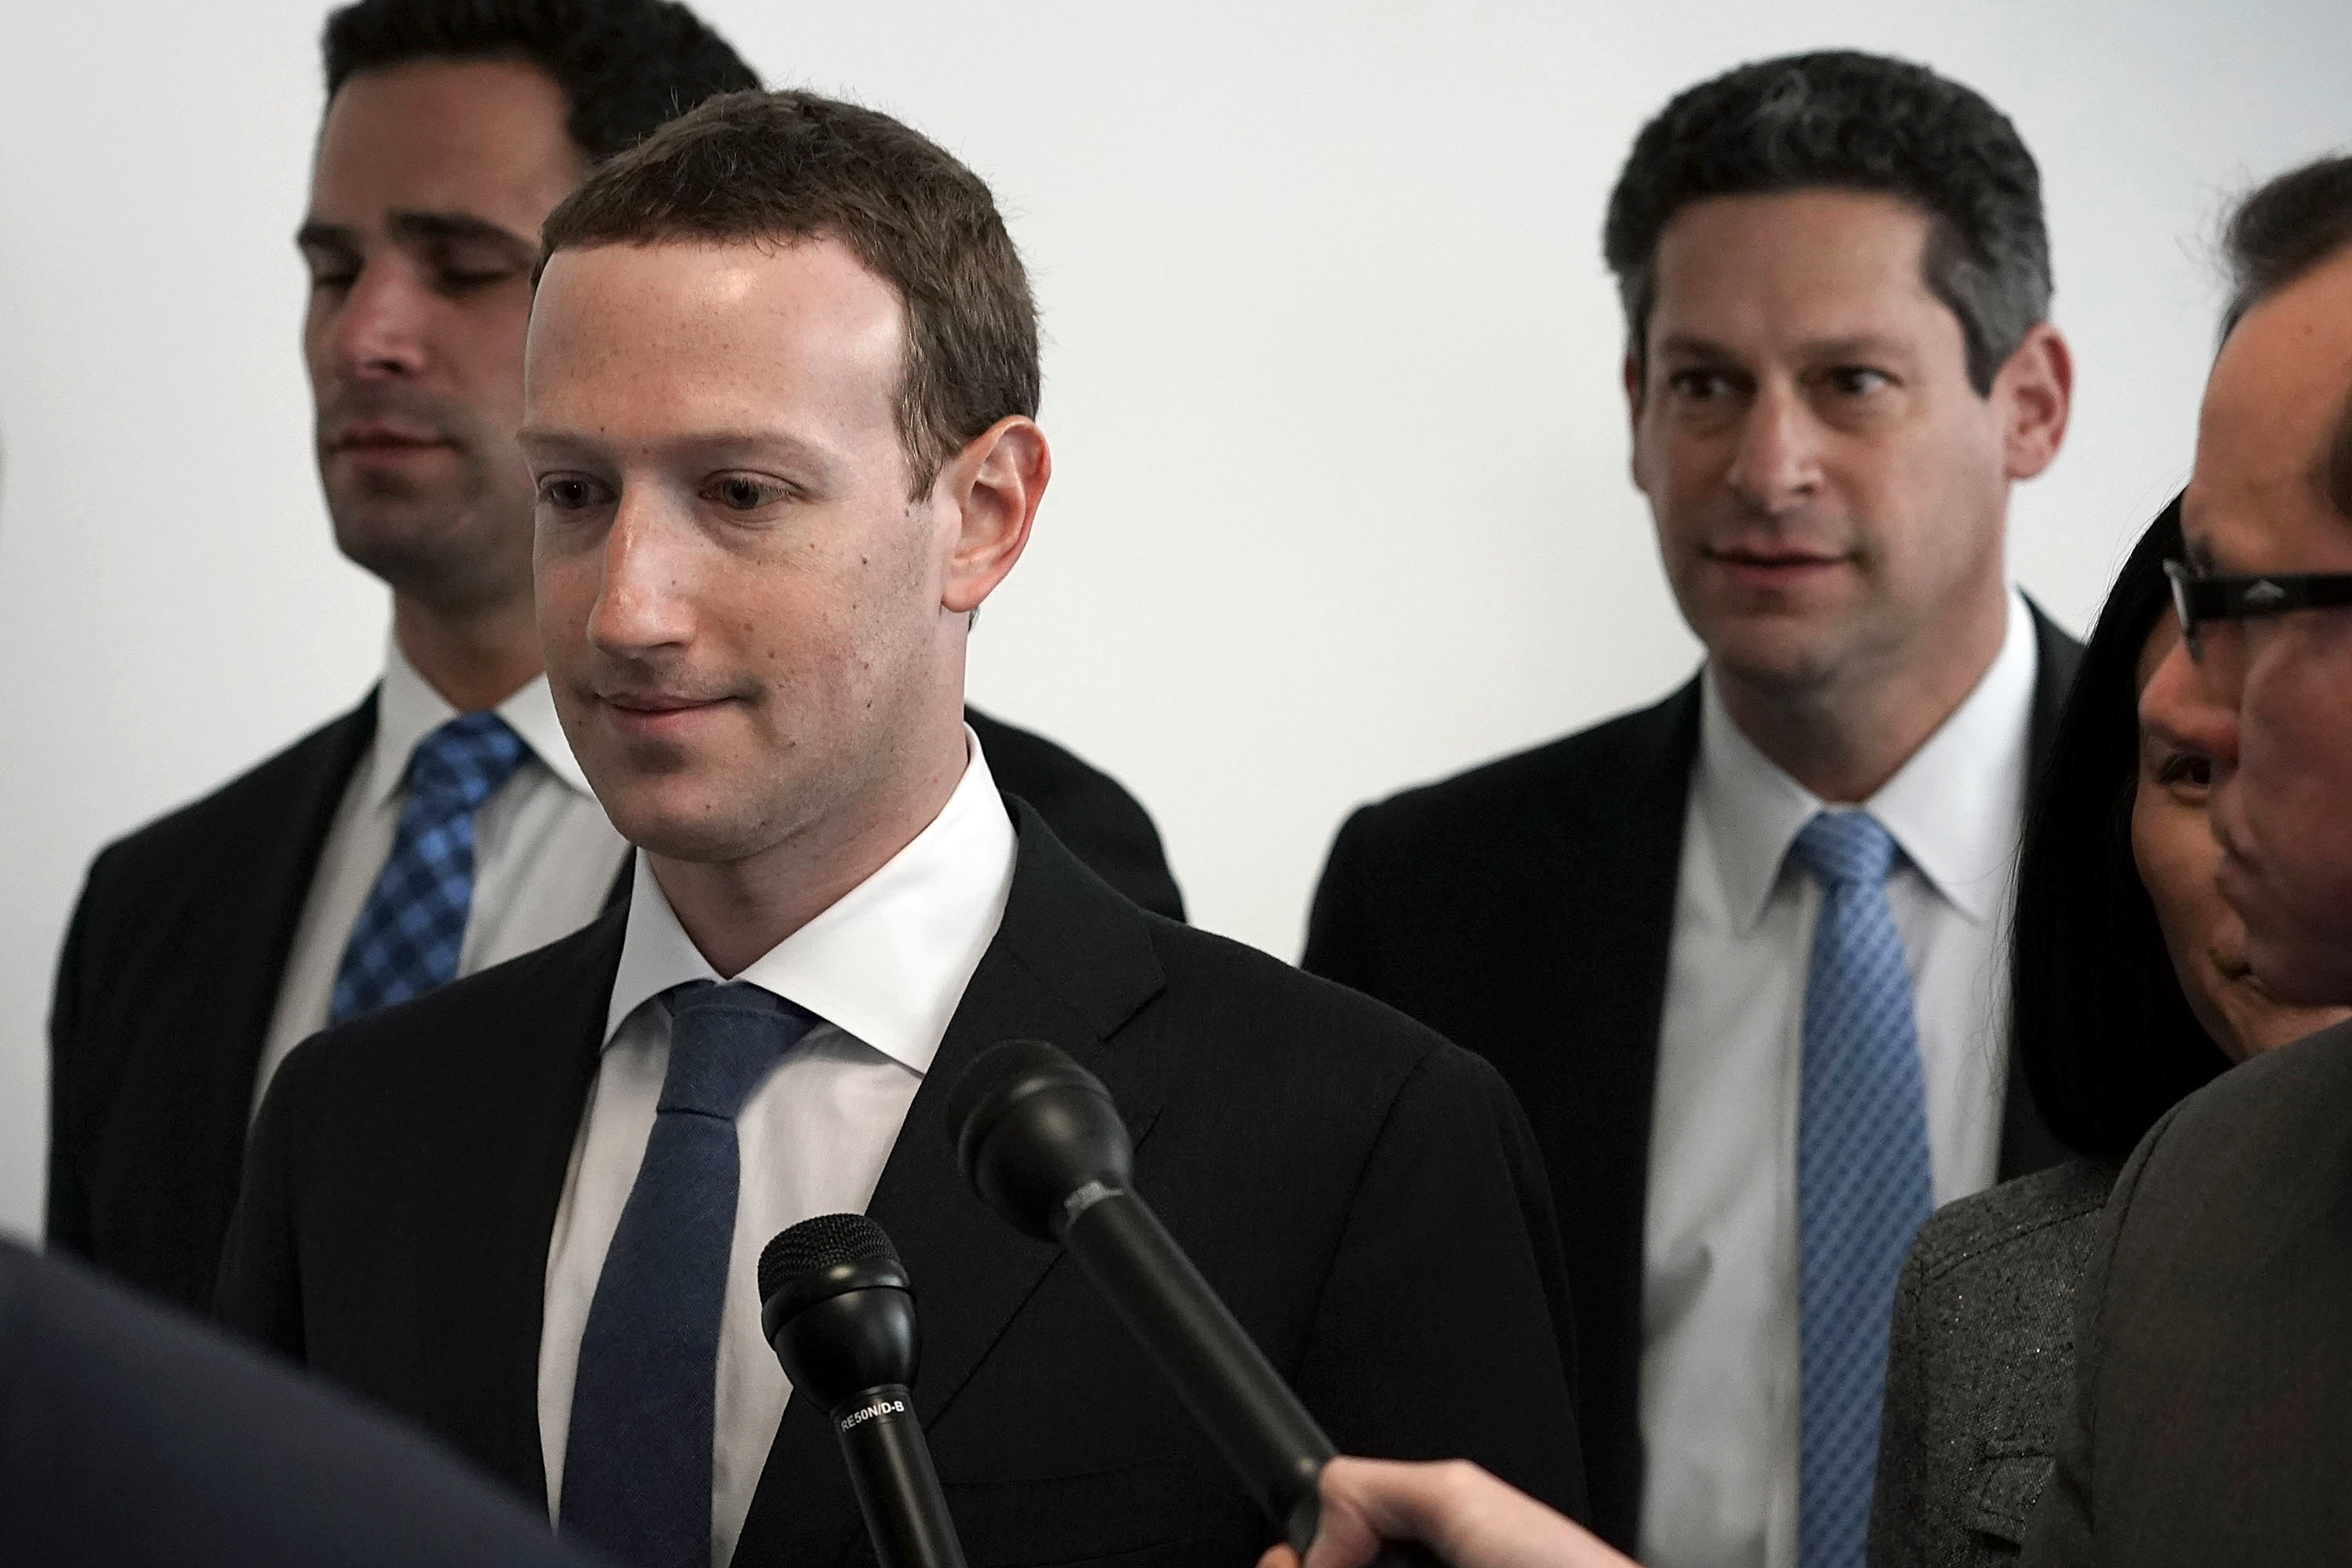 Facebook CEO Mark Zuckerberg (2 L) arrives at a meeting with U.S. Sen. Bill Nelson (D-FL), ranking member of the Senate Committee on Commerce, Science, and Transportation, April 9, 2018 on Capitol Hill in Washington, DC. (Alex Wong—Getty Images)